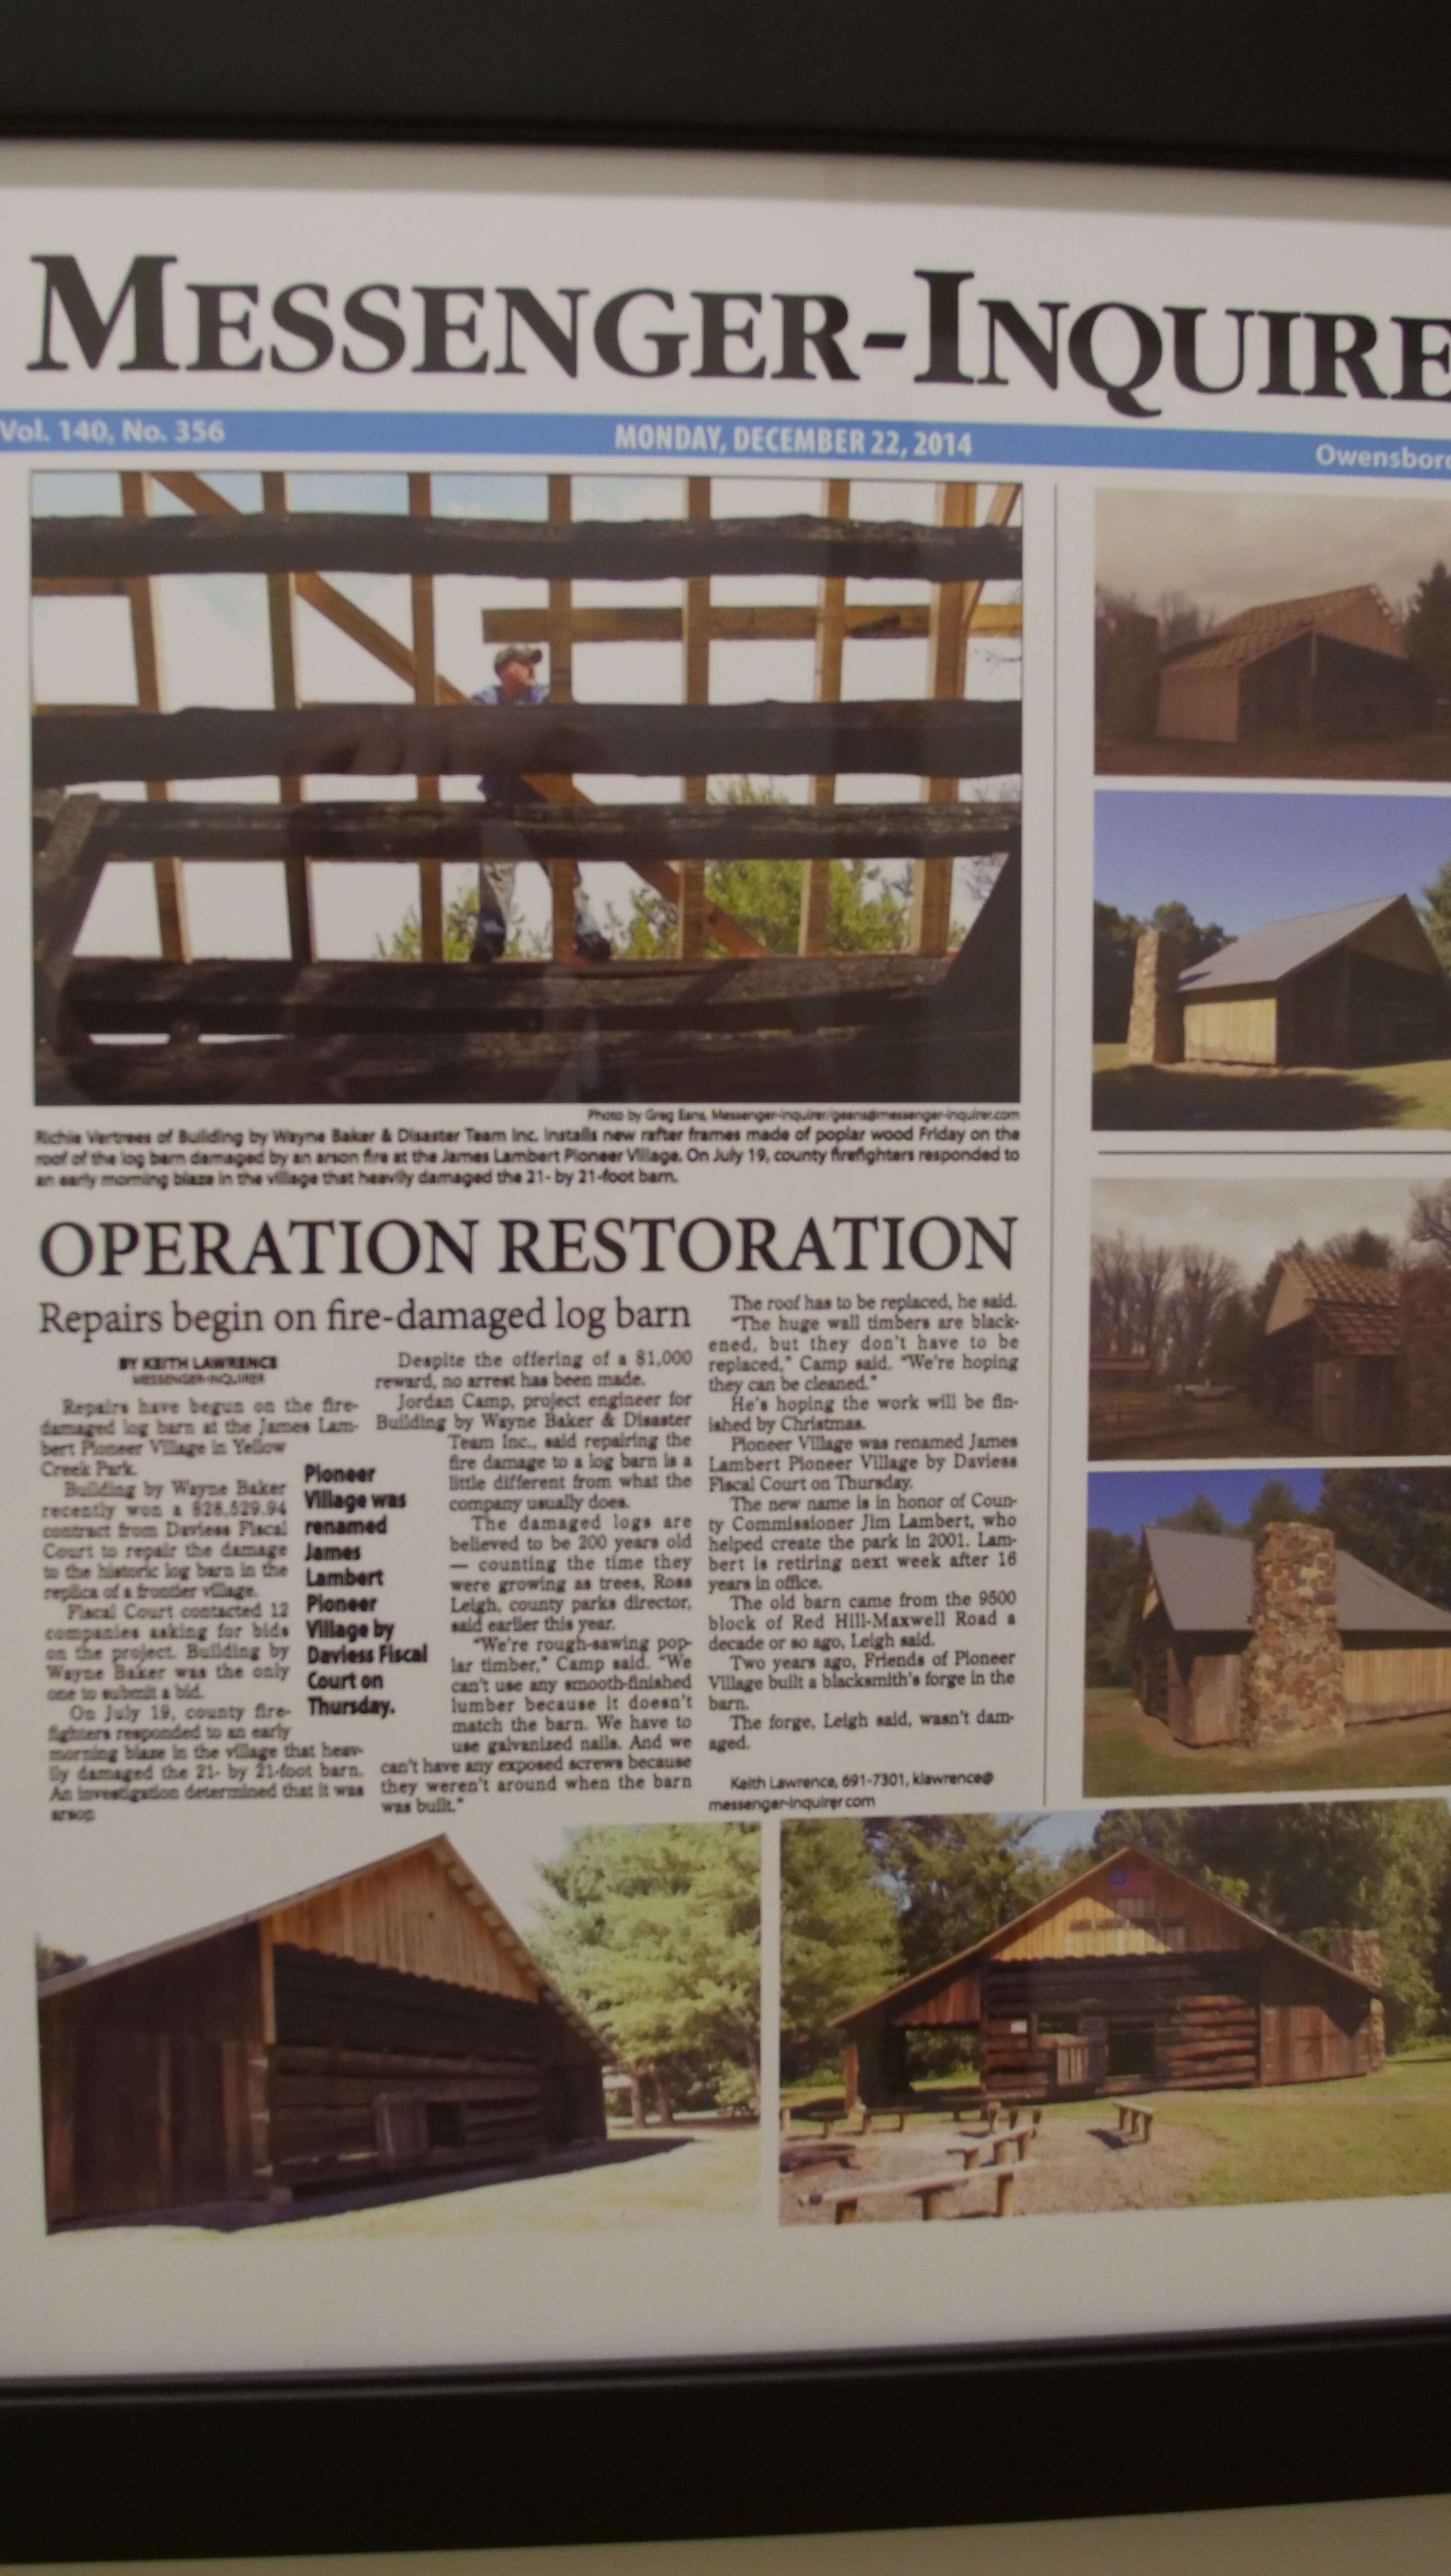 Newspaper showing building damaged by fire being restored